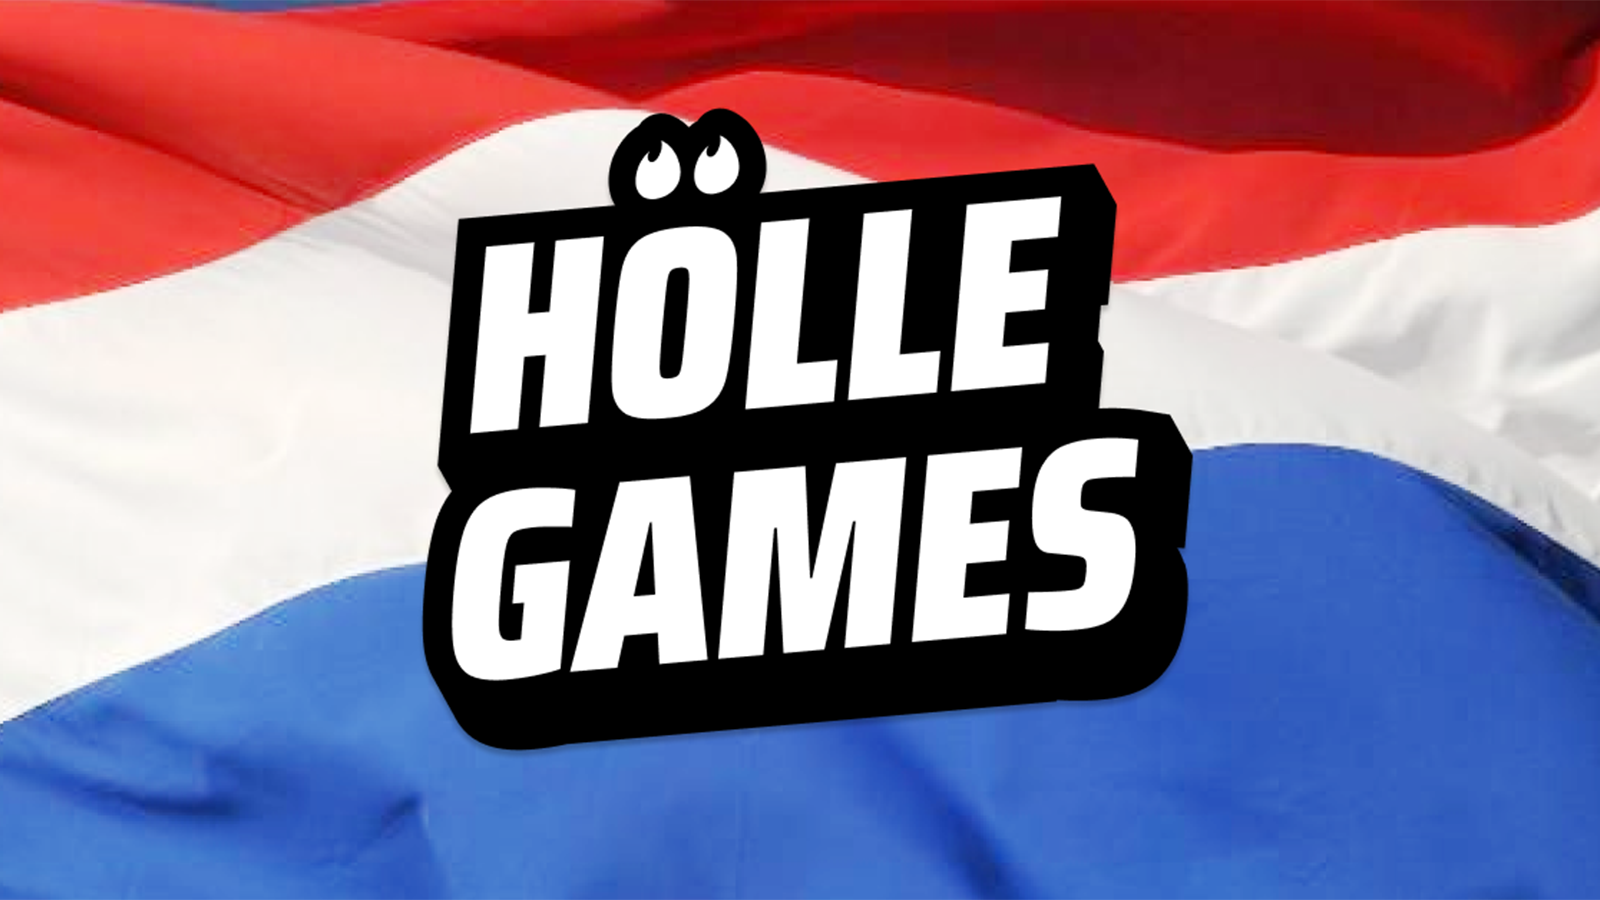 Strategic Partnership Hölle Games Teams Up with ZEAL Network